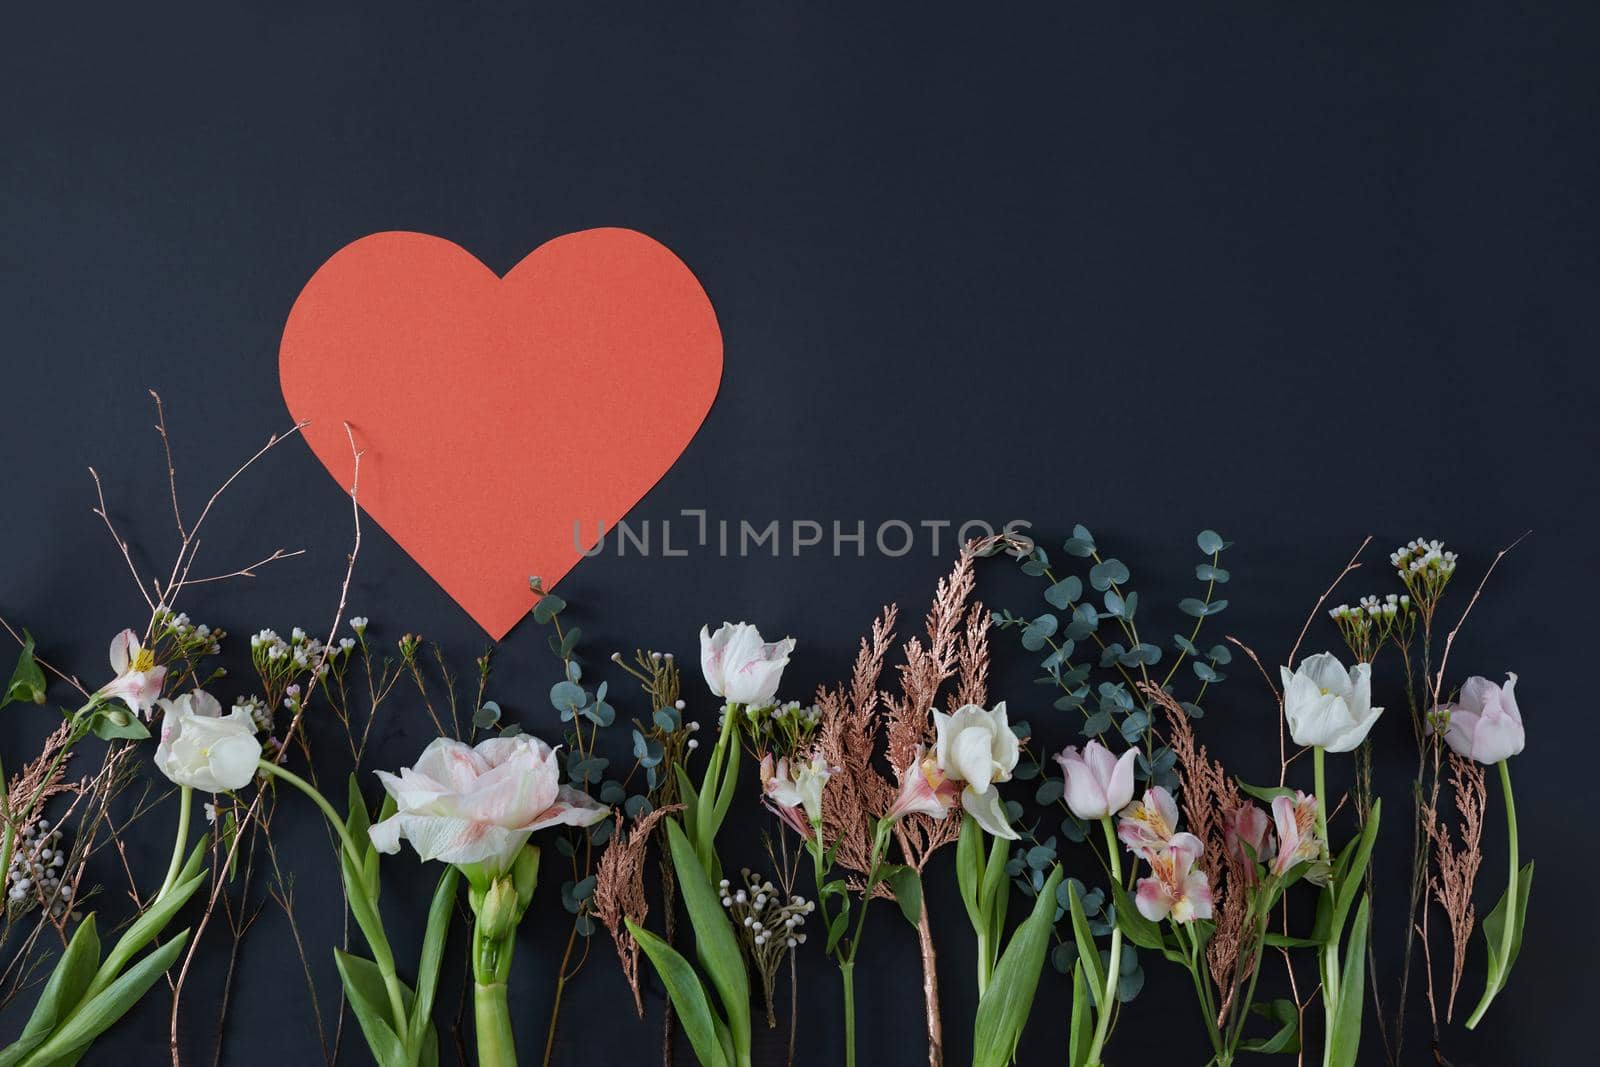 Paper heart on a dark background surrounded by flowers by Demkat